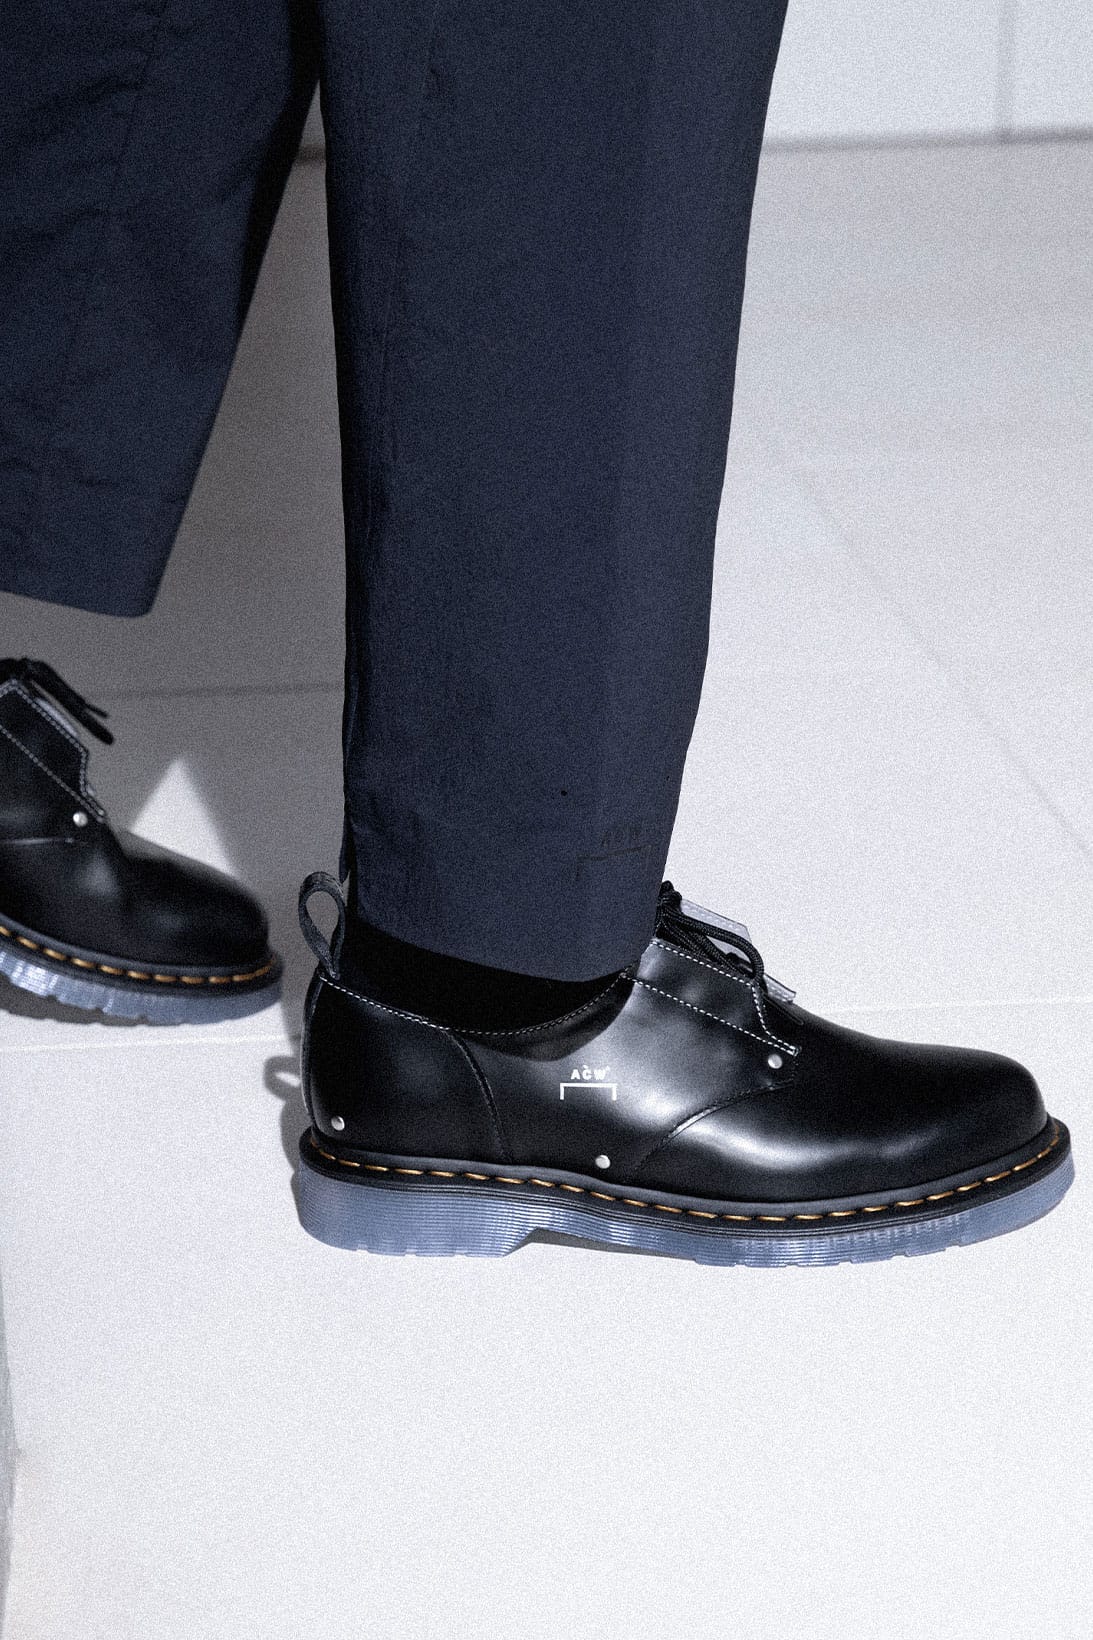 A-COLD-WALL* x Dr. Martens 1461 Collaboration | Hypebae